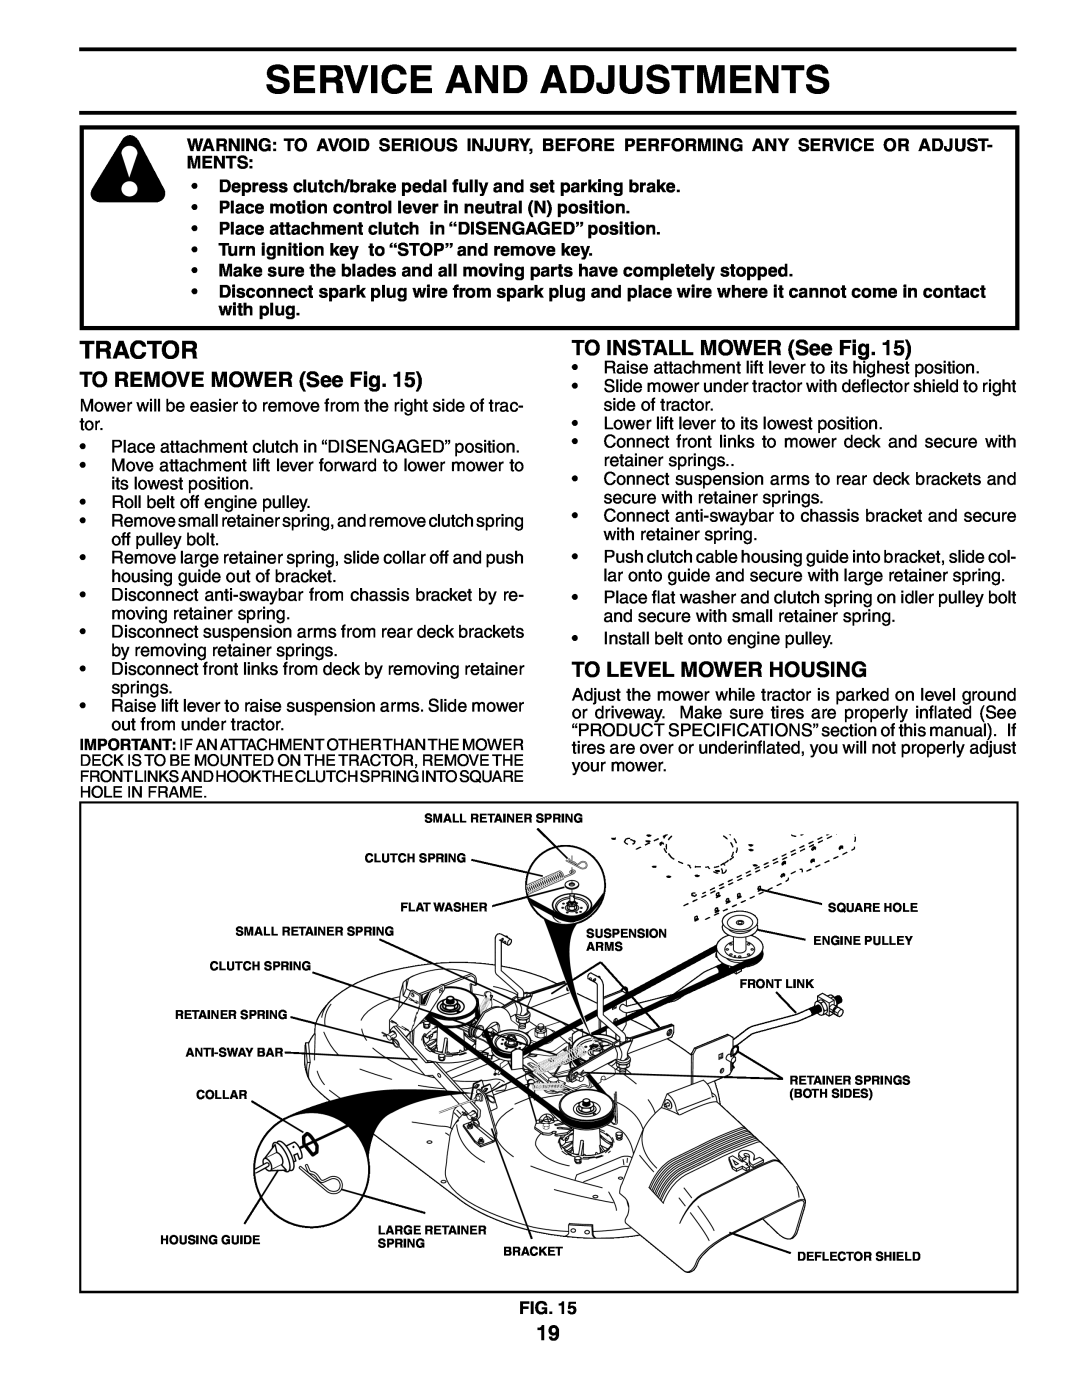 Poulan BB185H42YT manual Service And Adjustments, TO REMOVE MOWER See Fig, TO INSTALL MOWER See Fig, To Level Mower Housing 